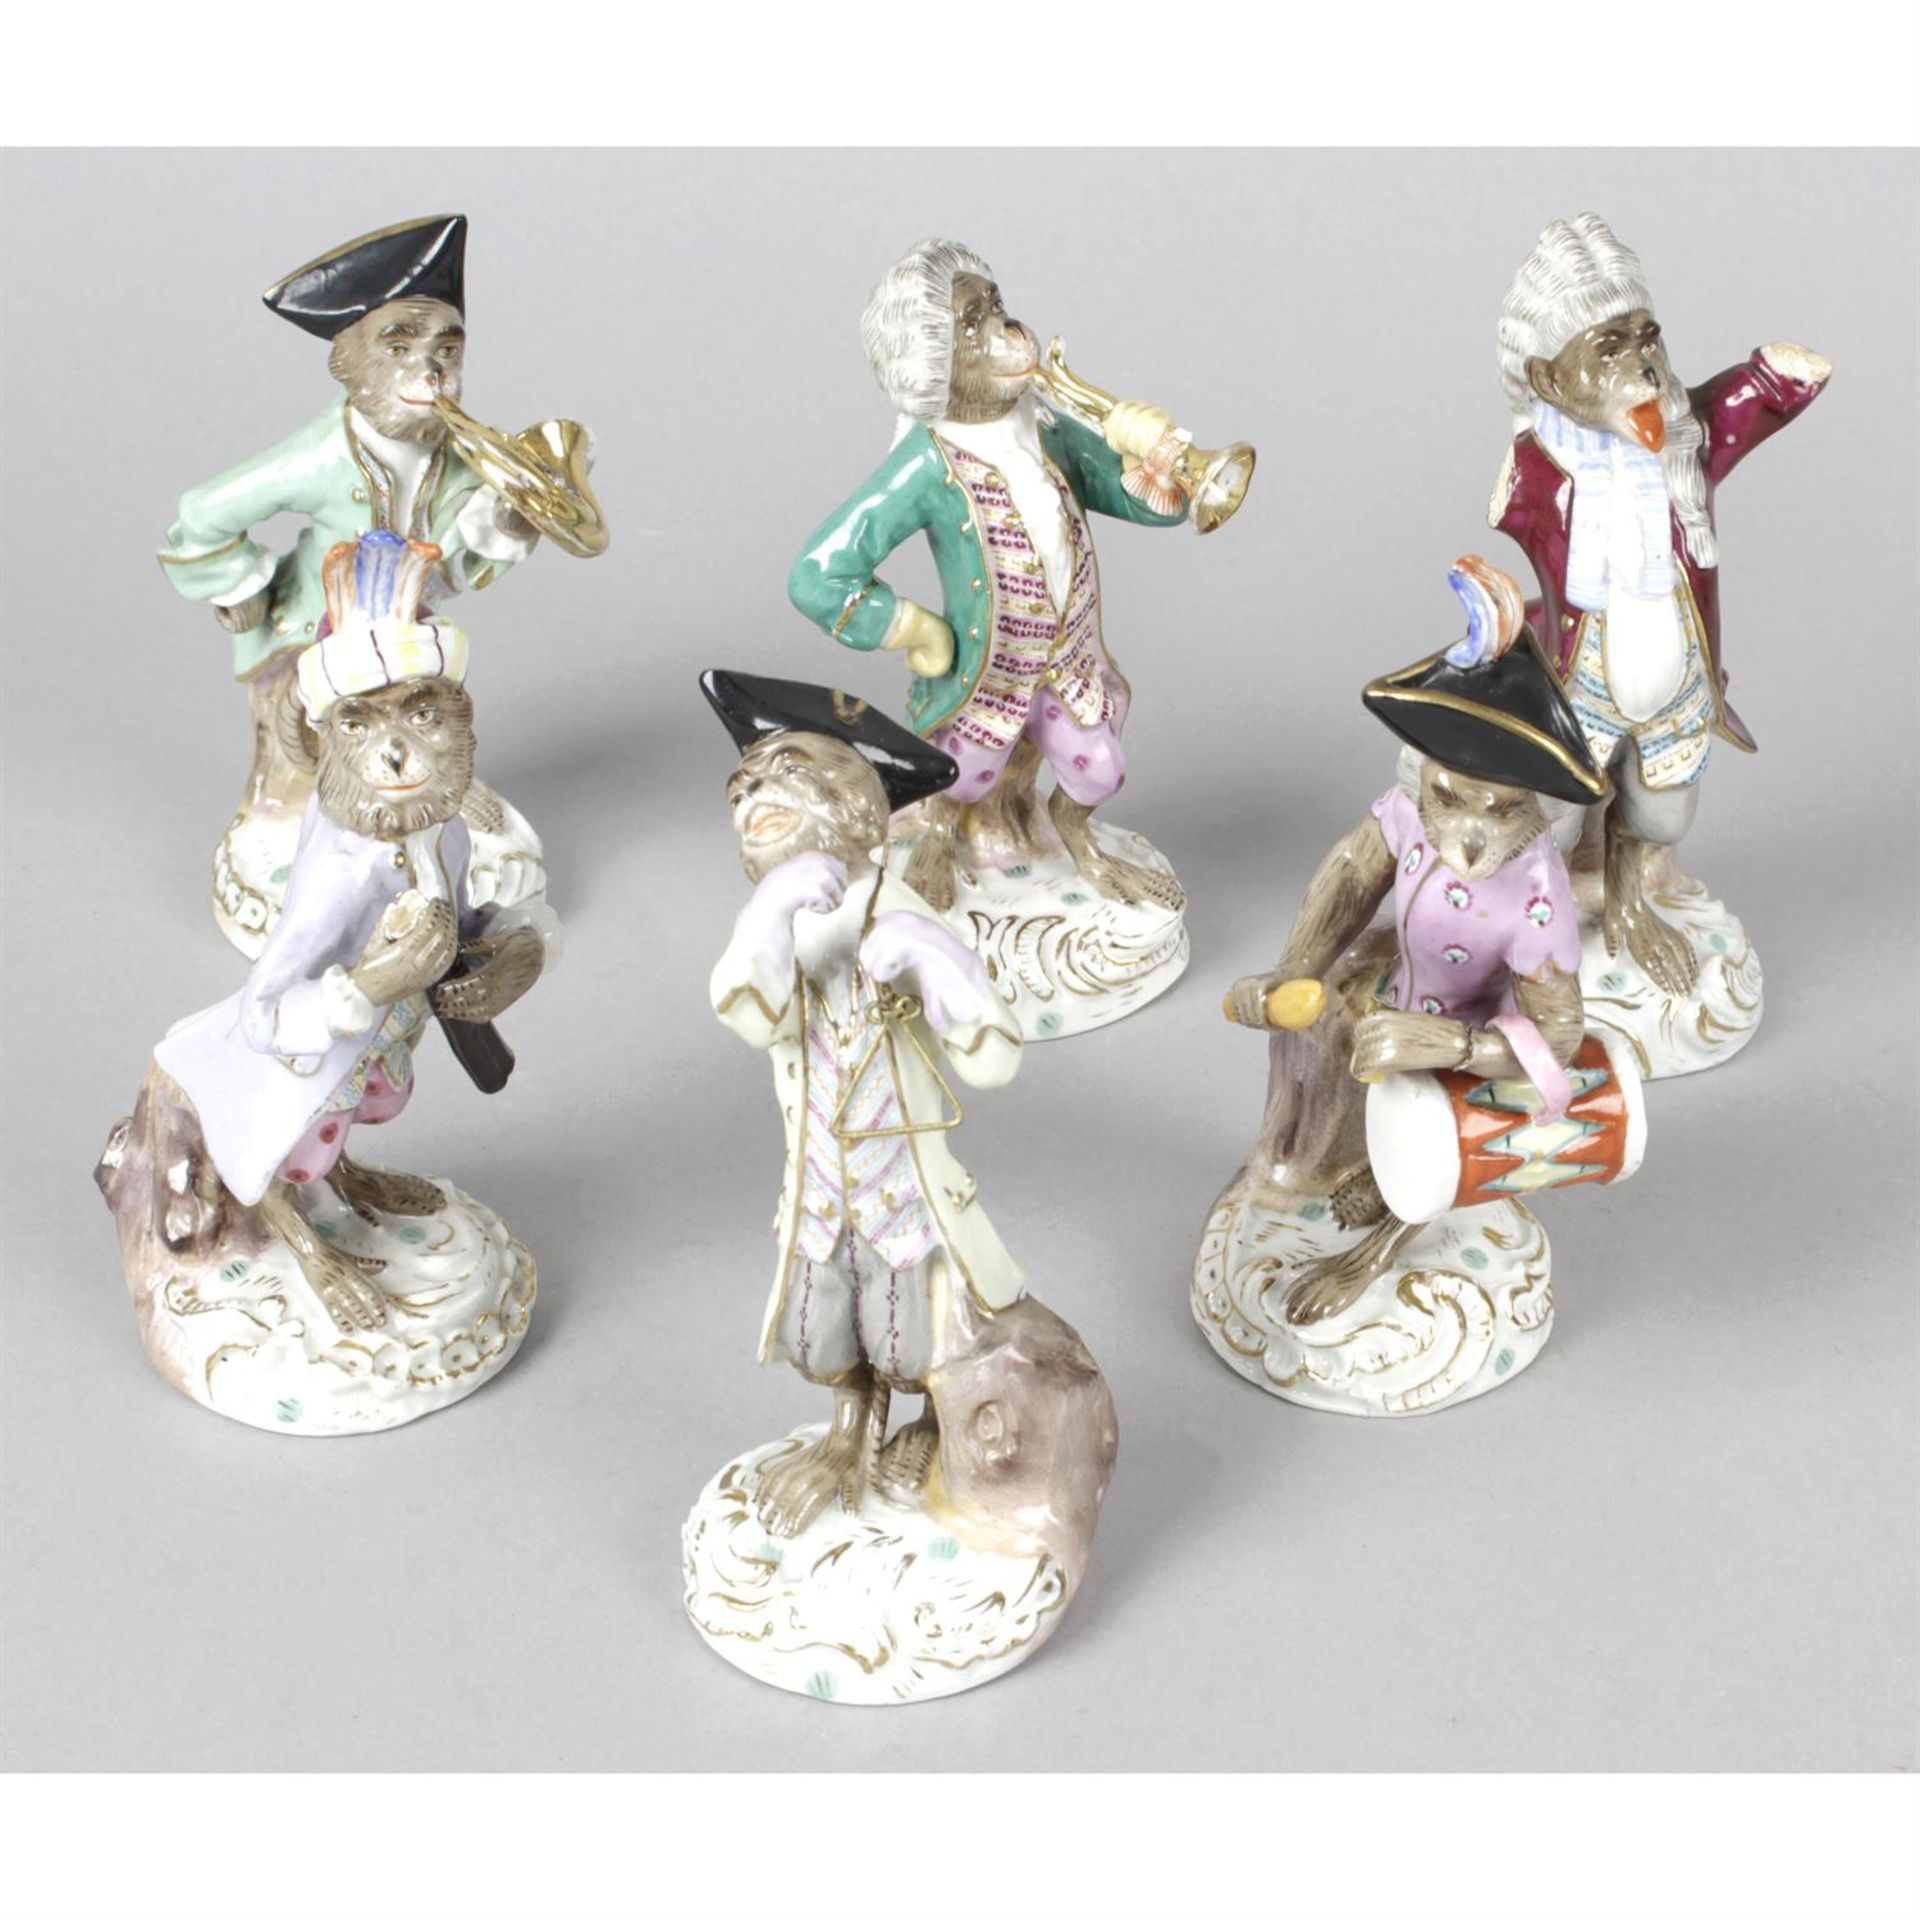 A group of six porcelain monkey band figurines with Meissen style marks.